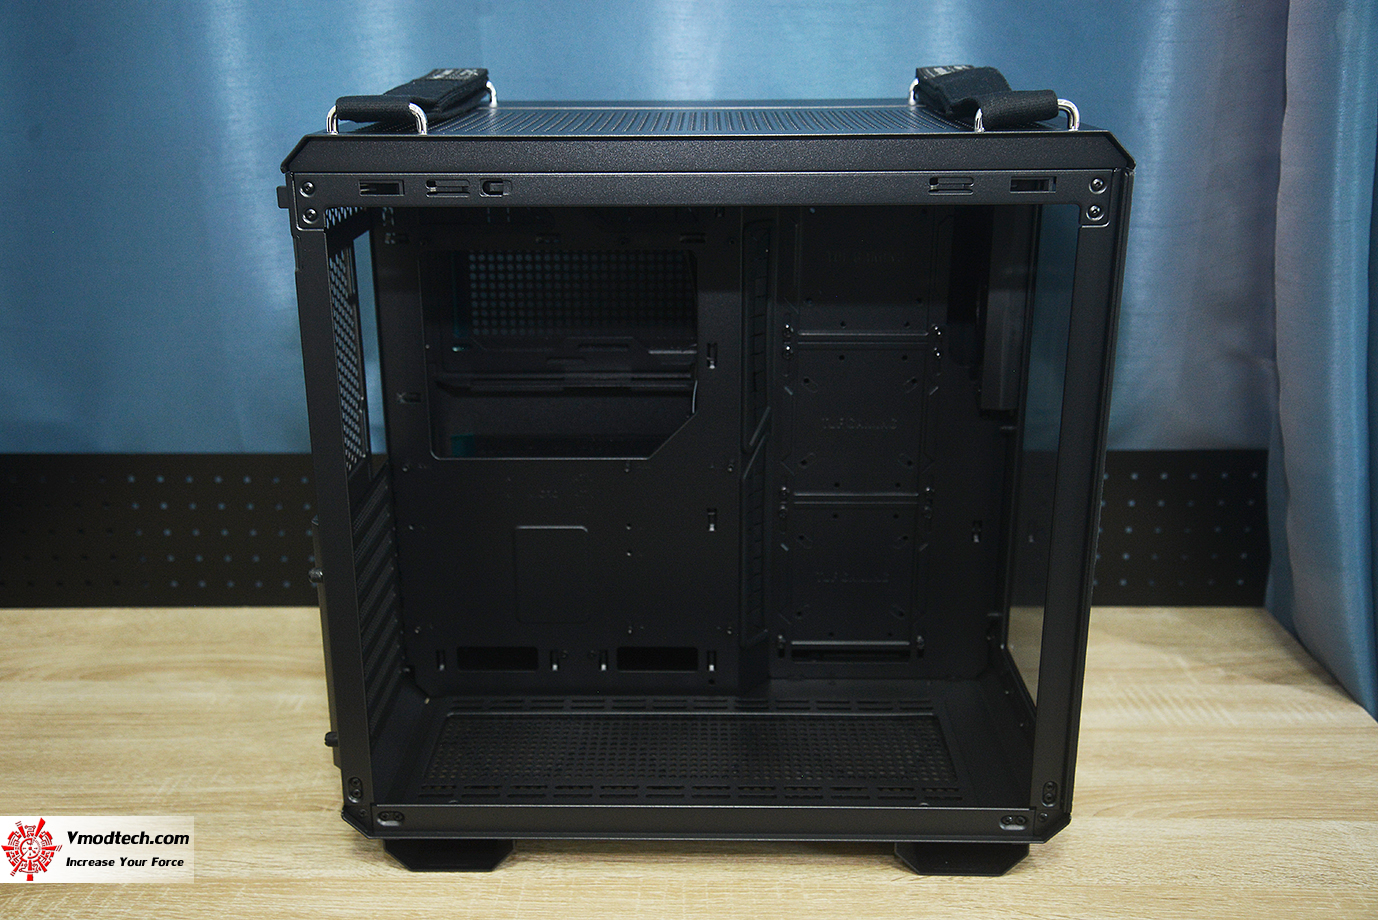 dsc 4798 ASUS TUF GAMING GT502 GAMING CASES REVIEW